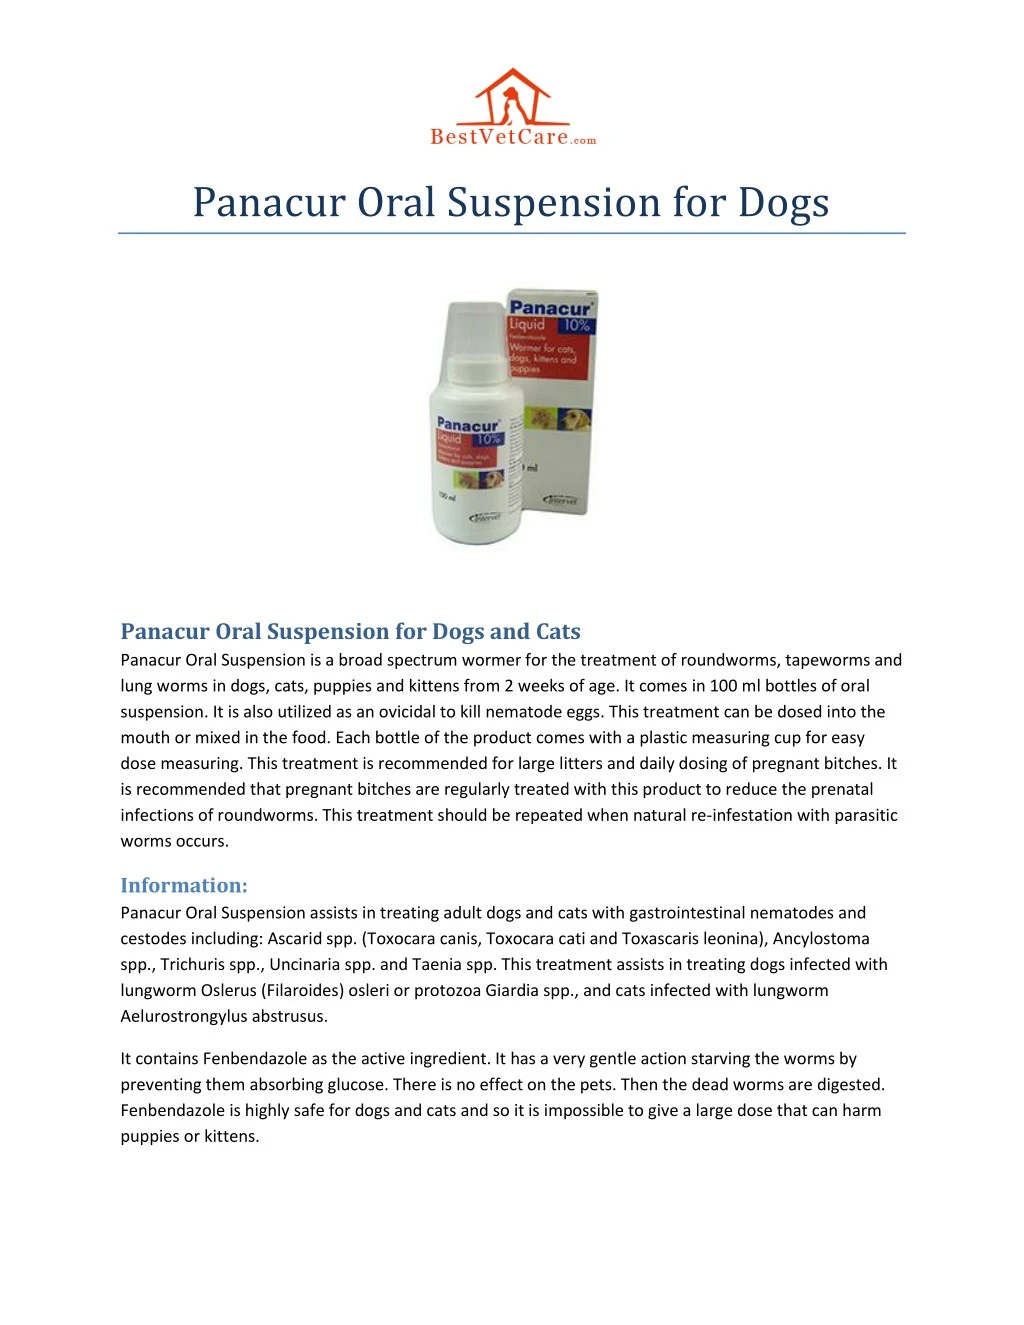 panacur oral suspension for dogs